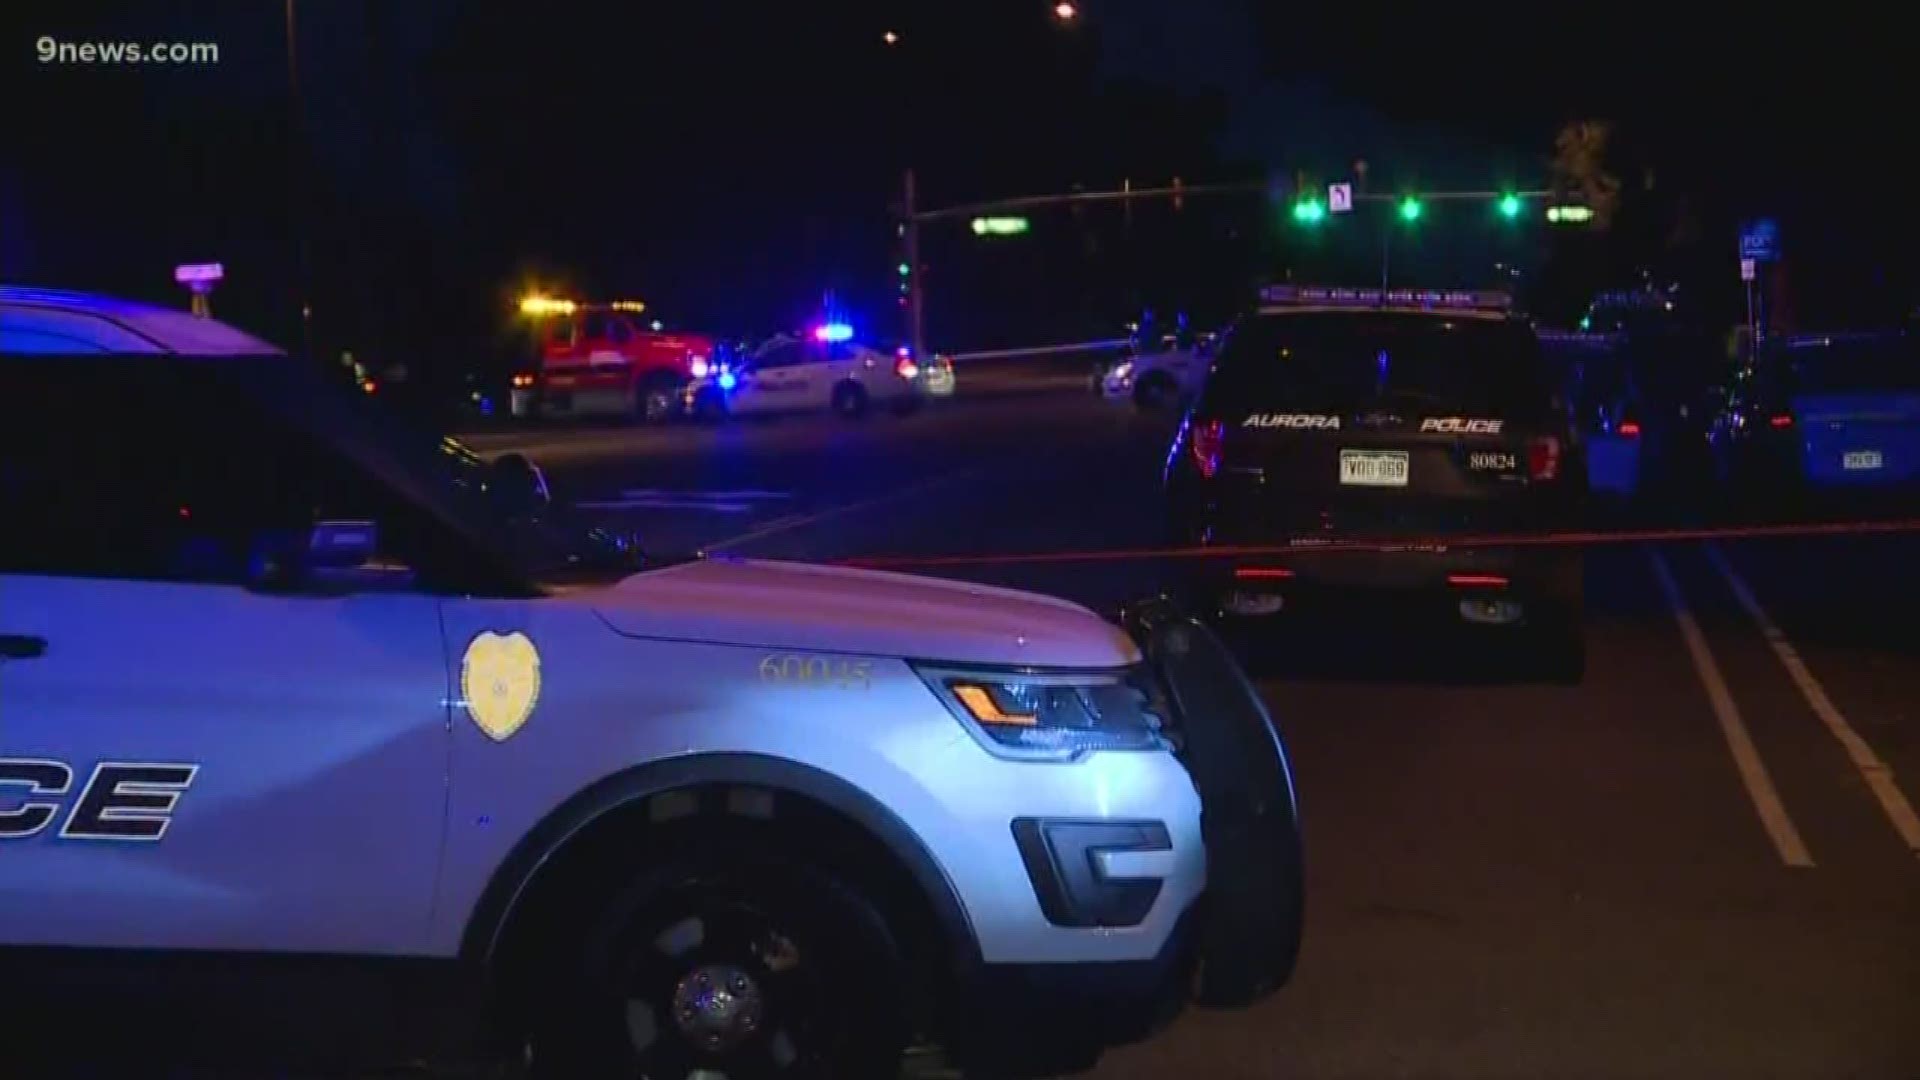 One man was shot during an officer-involved shooting Thursday night